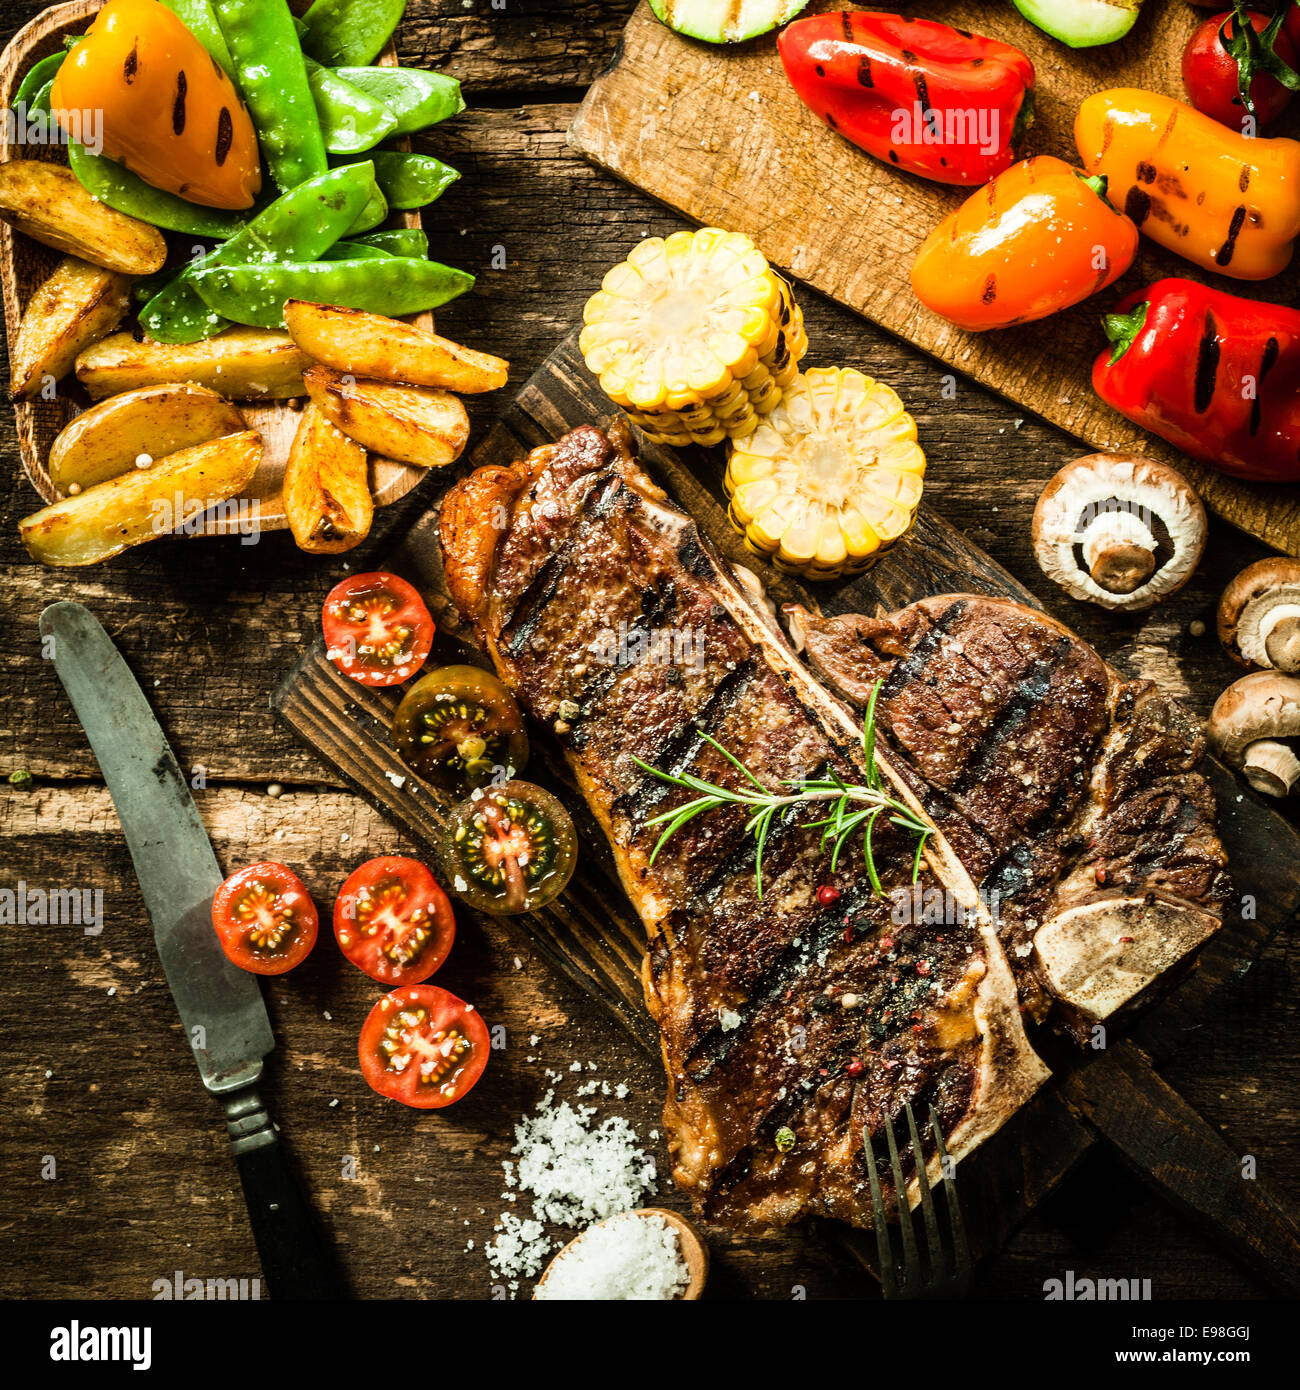 View from above of a delicious grilled porterhouse steak with assorted roast vegetables including tomato, peppers, mushrooms, corn, mangetout, and potato wedges Stock Photo